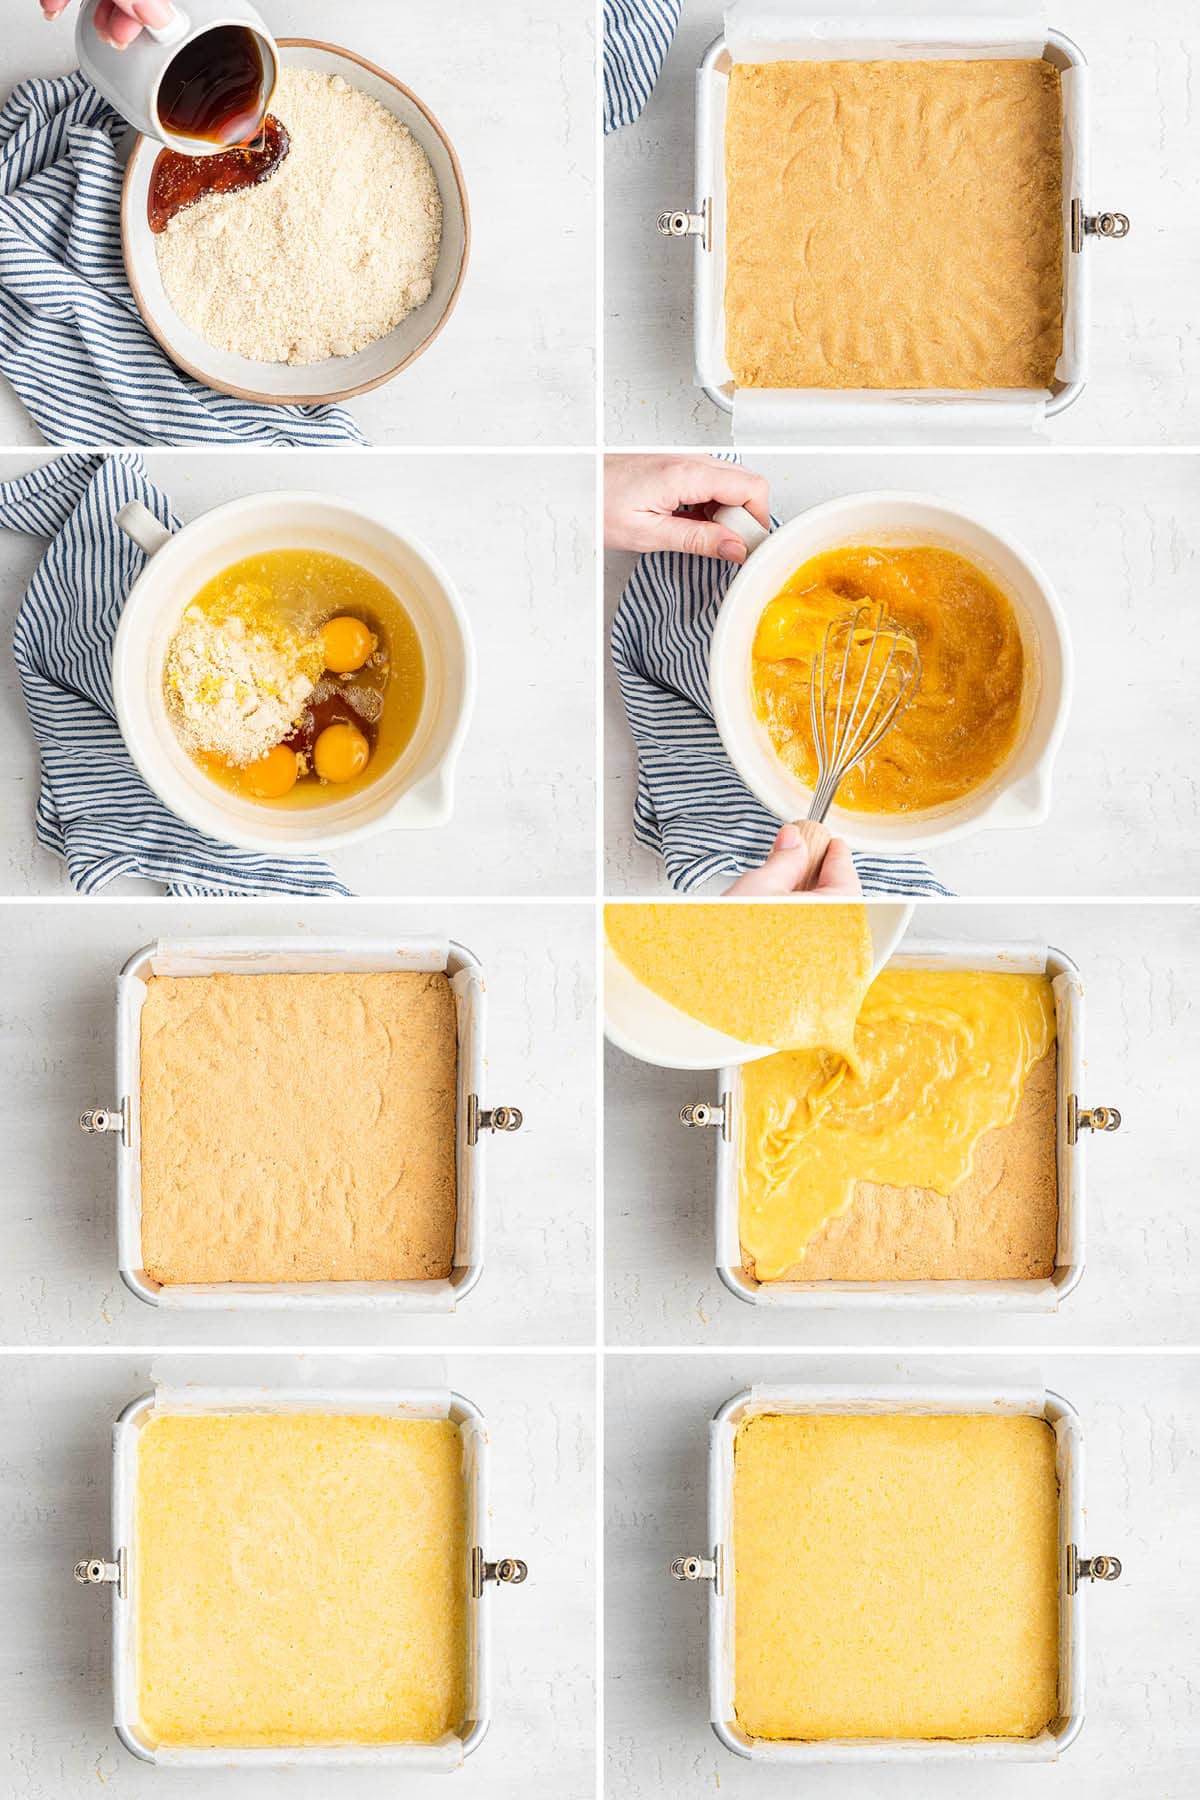 Collage of 8 photos showing the steps to make Healthy Lemon Bars: whisking the filling, baking the crust and then baking the bars with the filling added.